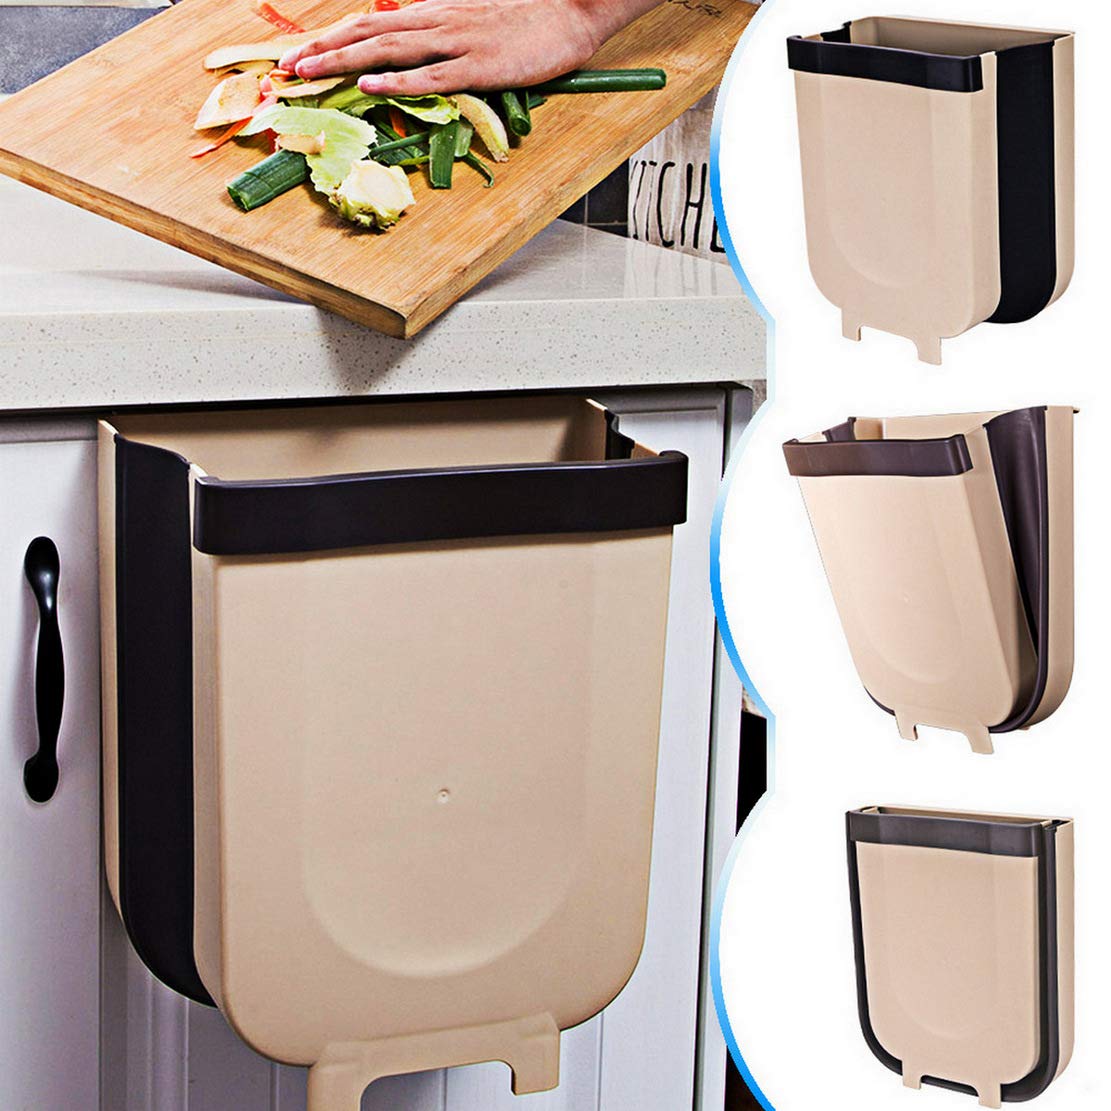 Hanging Trash Can Folded for Kitchen Cabinet Door, Collapsible Trash Bin Small Compact Garbage Can Attached to Cabinet Door Kitchen Drawer Bedroom Dorm Room Car - 8L (Brown)